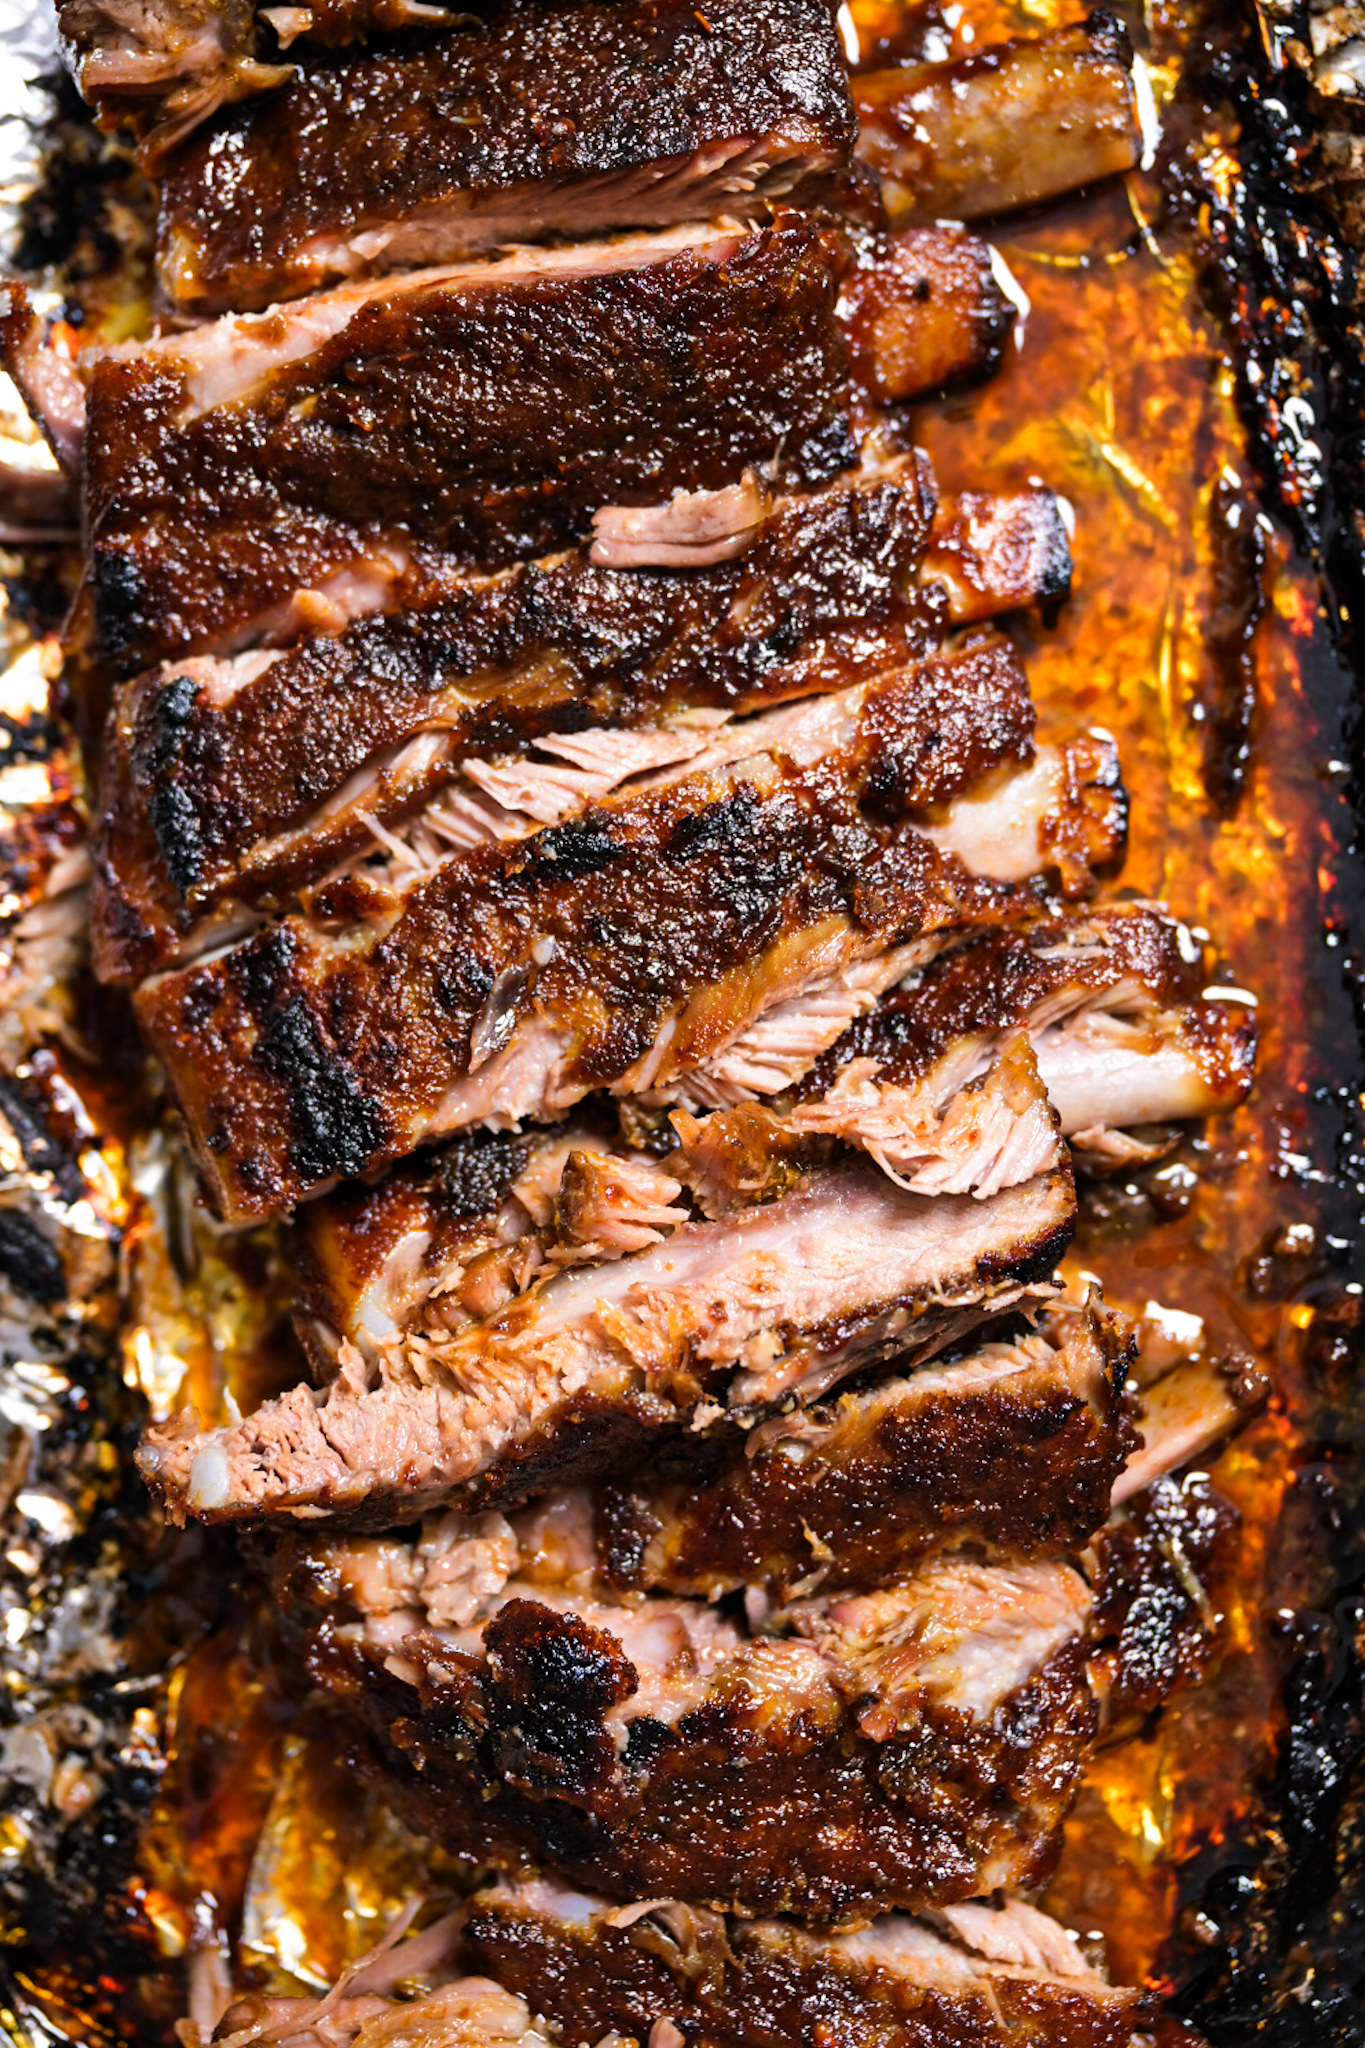 Baked pork ribs with prune barbecue sauce